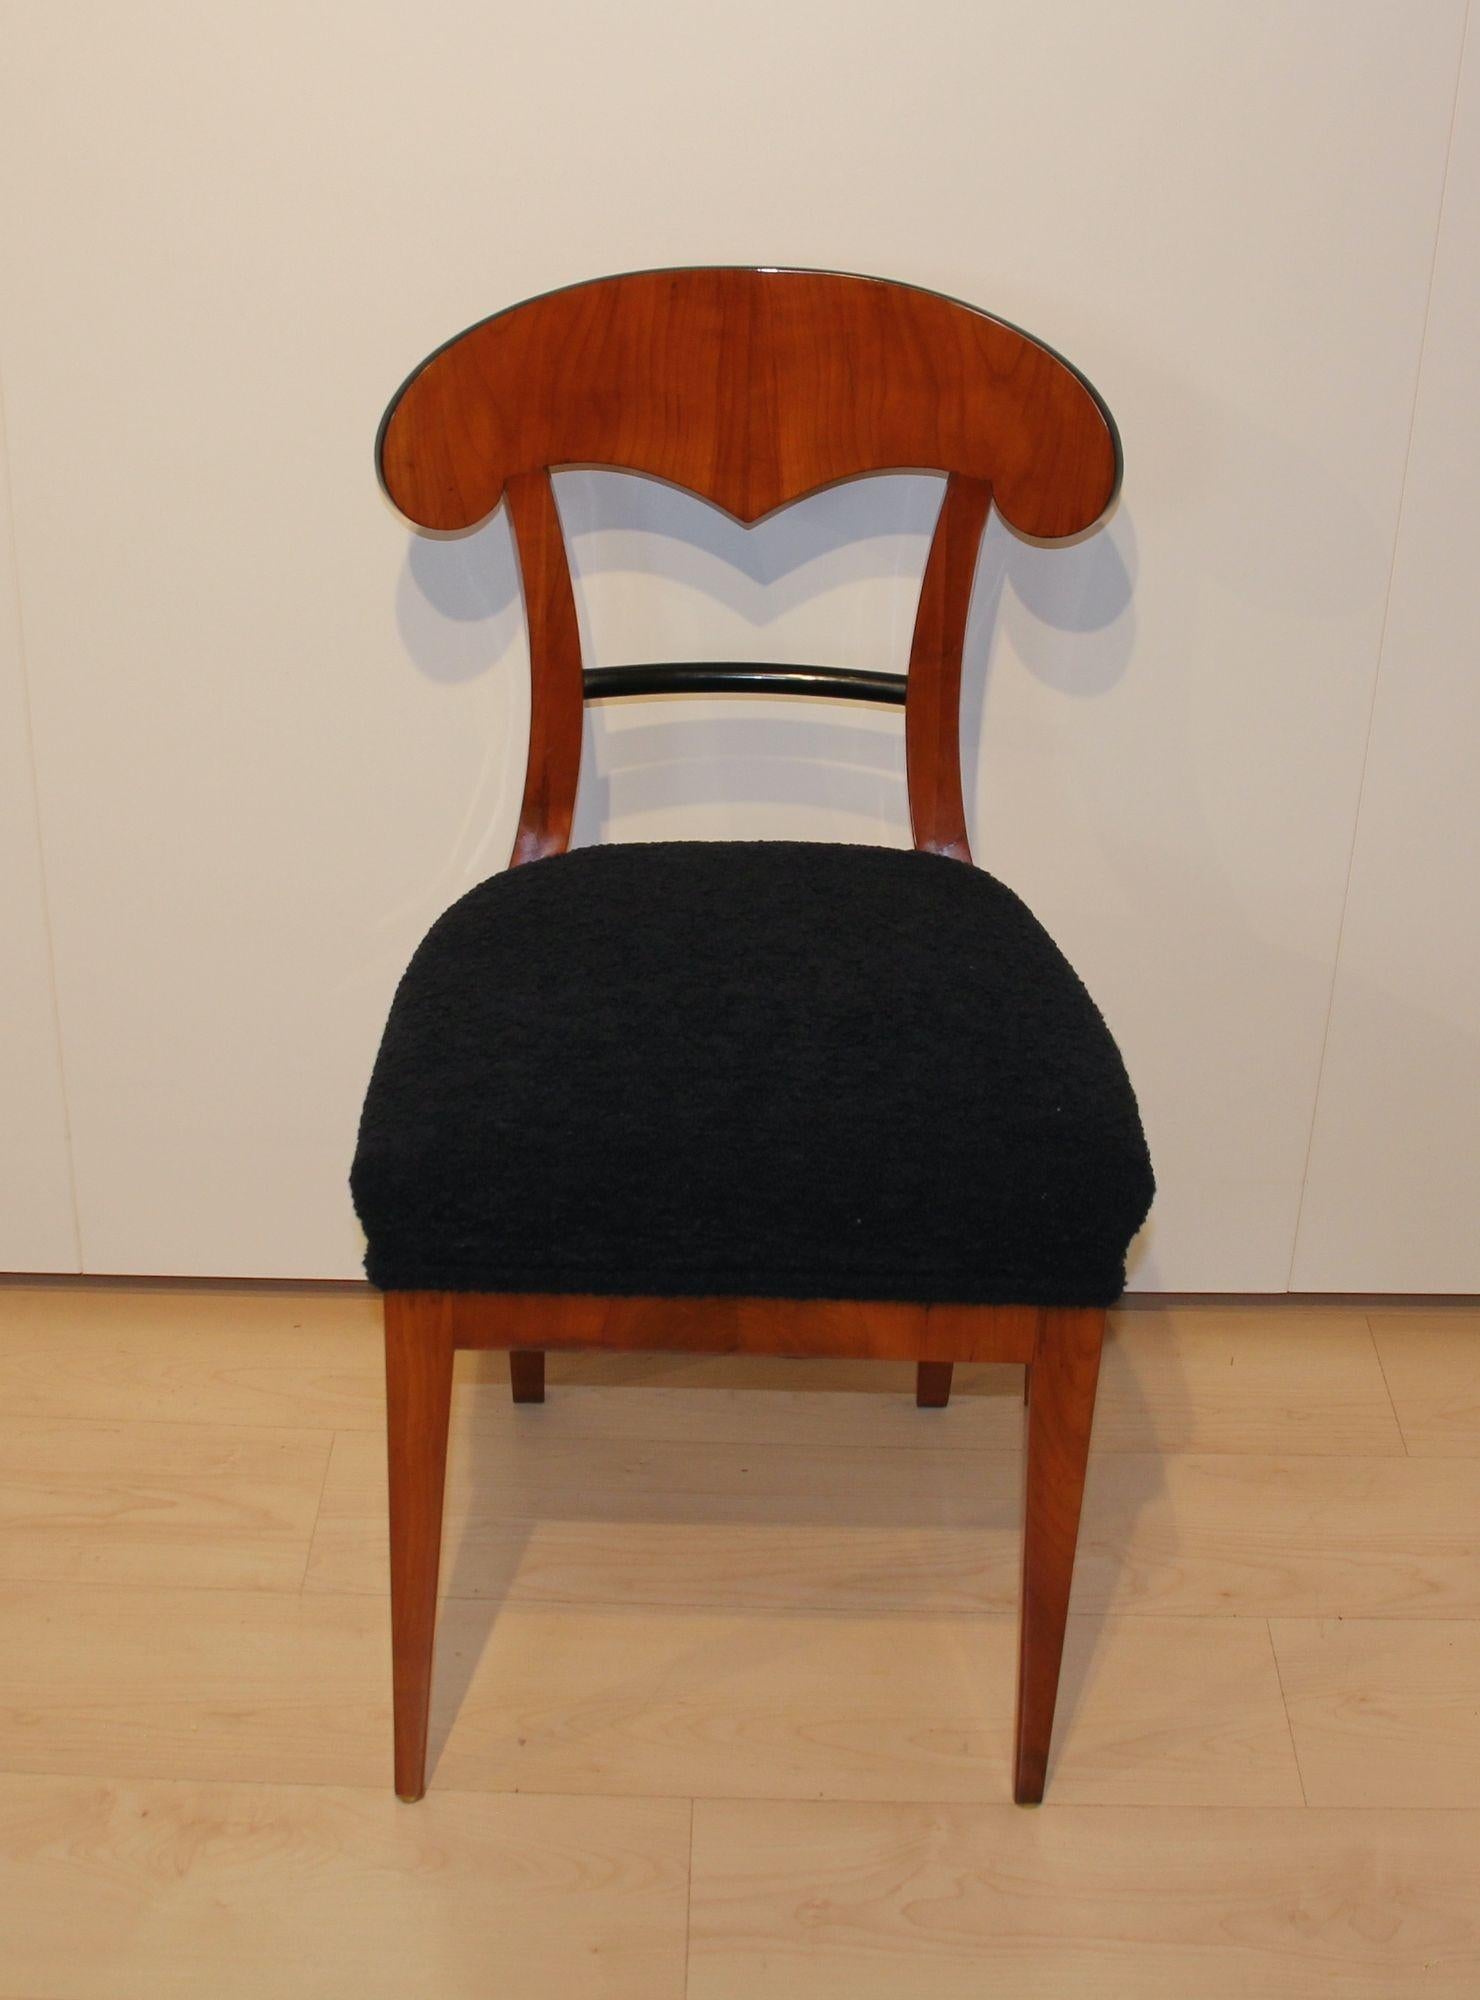 Single Biedermeier Shovel Chair, Cherry Veneer, South Germany circa 1820.
Cherry veneered and solid. Book-matched veneer on large shovel.
Ebonized intermediate bar in the back. Newly upholstered and covered with black boucle fabric.
Dimensions: H